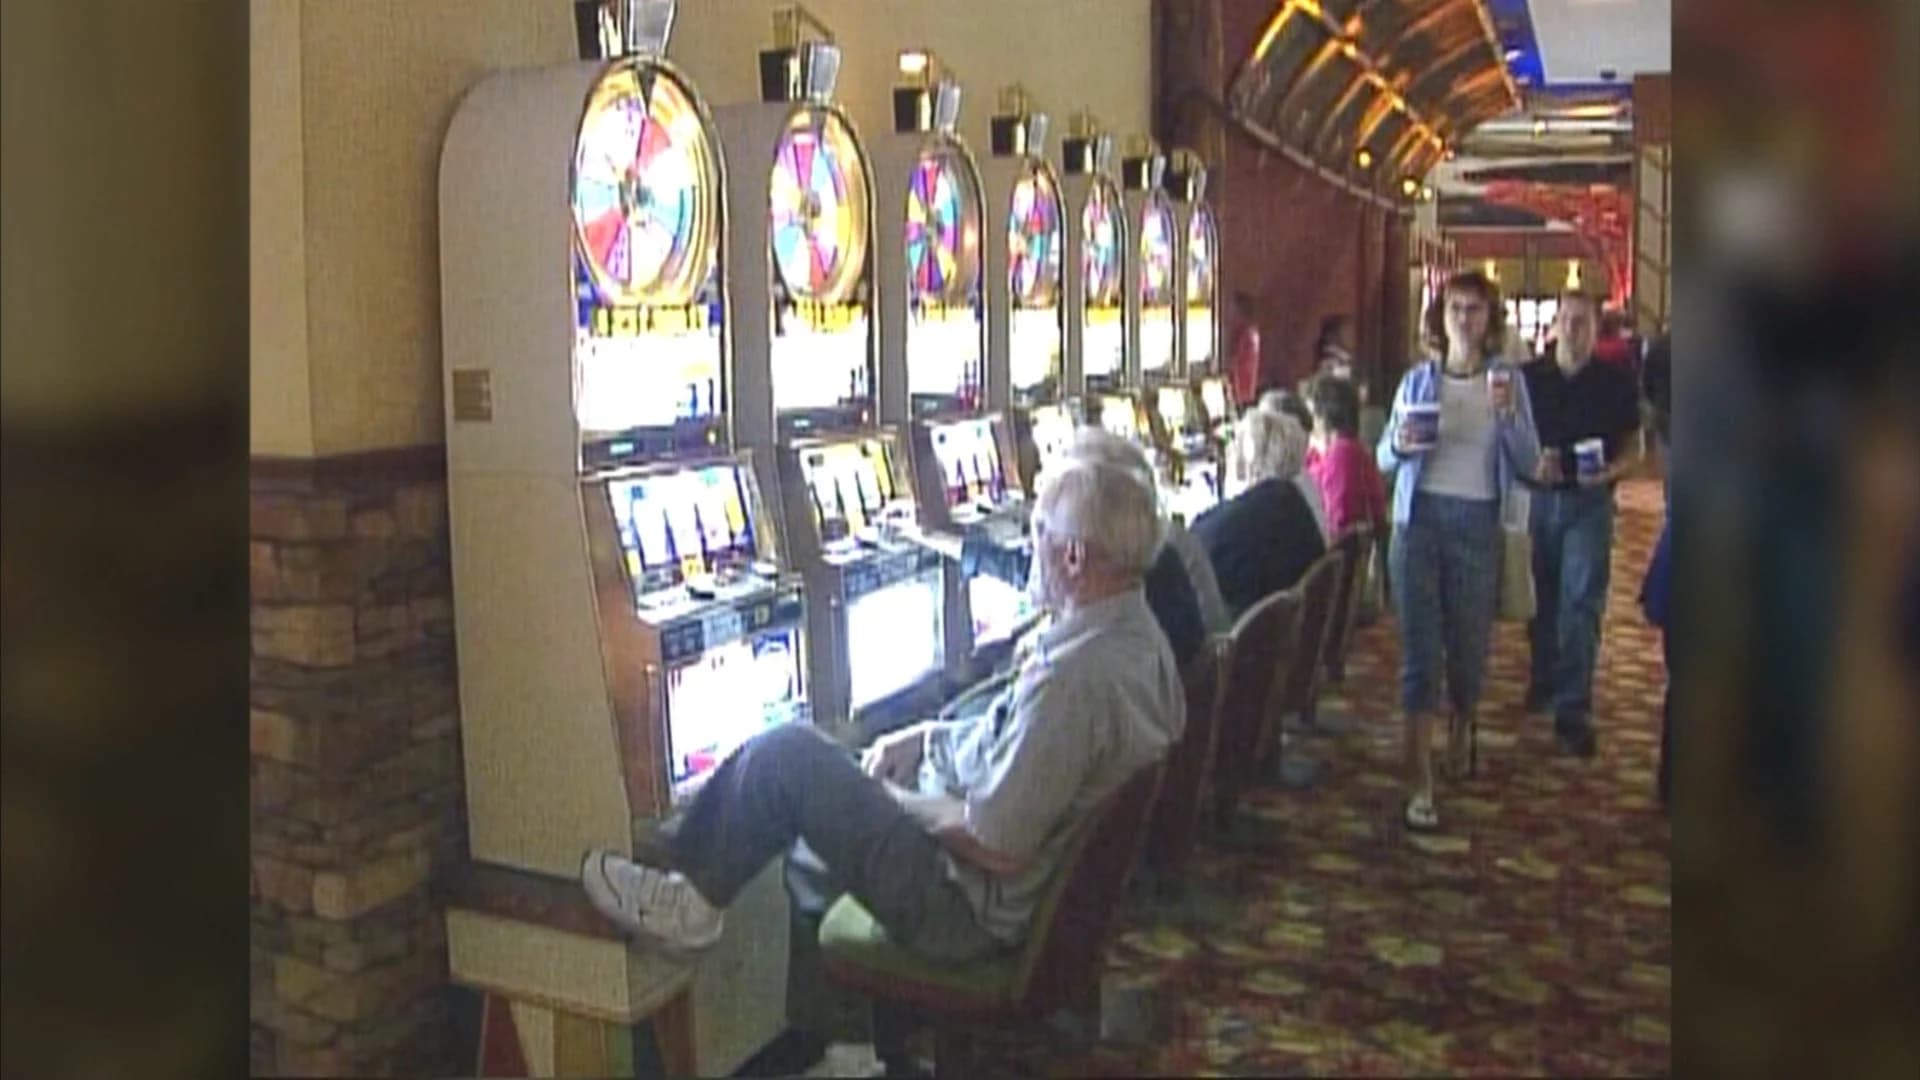 State lawmakers debate idea of new casino in Fairfield County